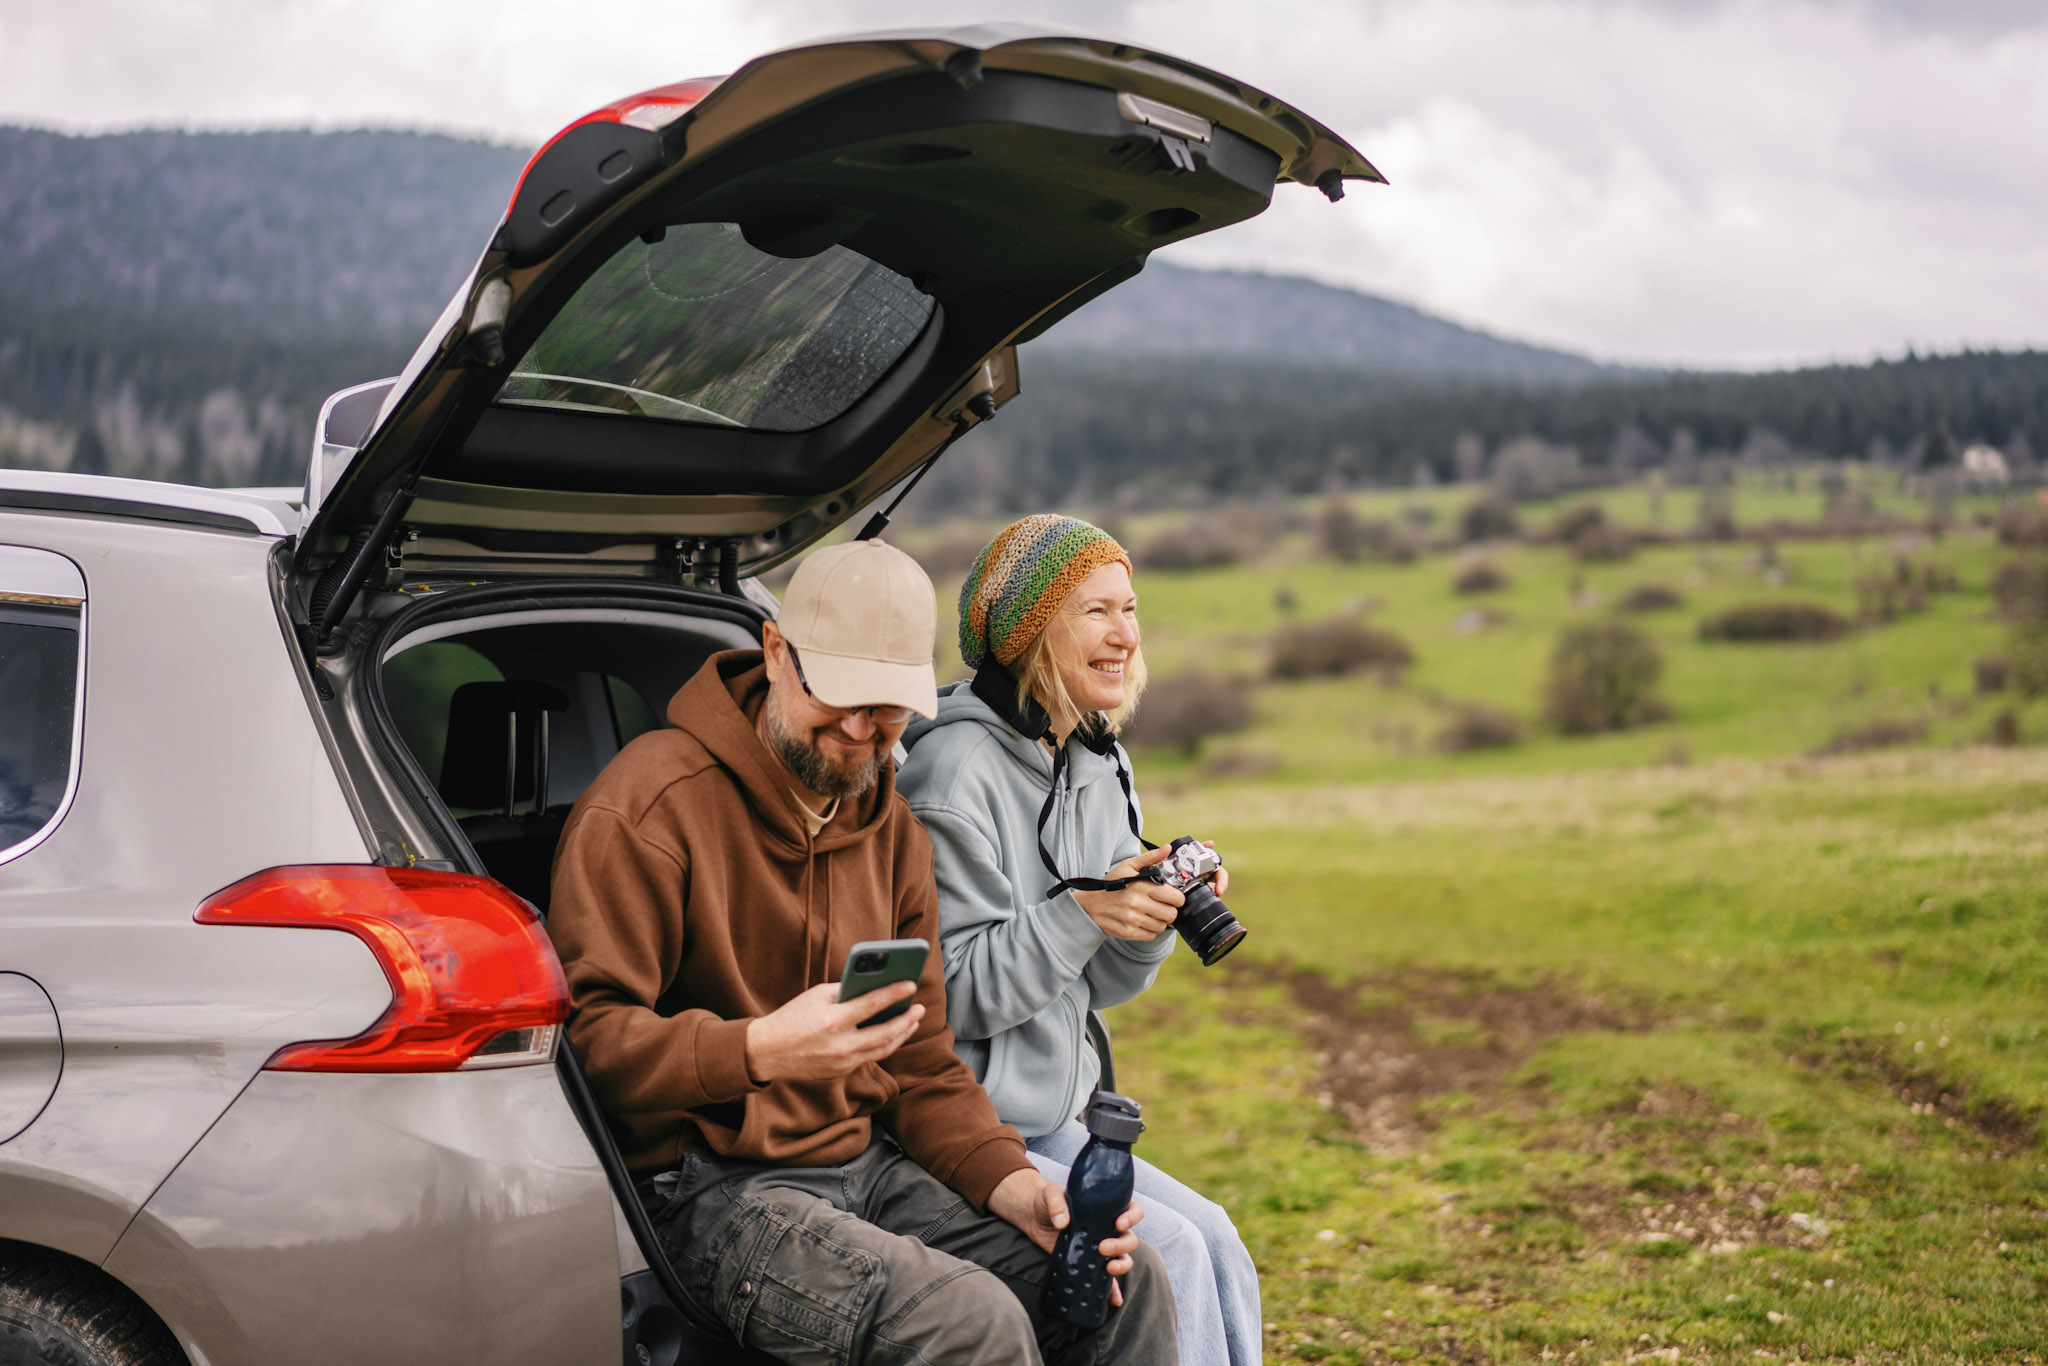 stock image of a middle-aged tourist couple on a roadtrip in the countryside